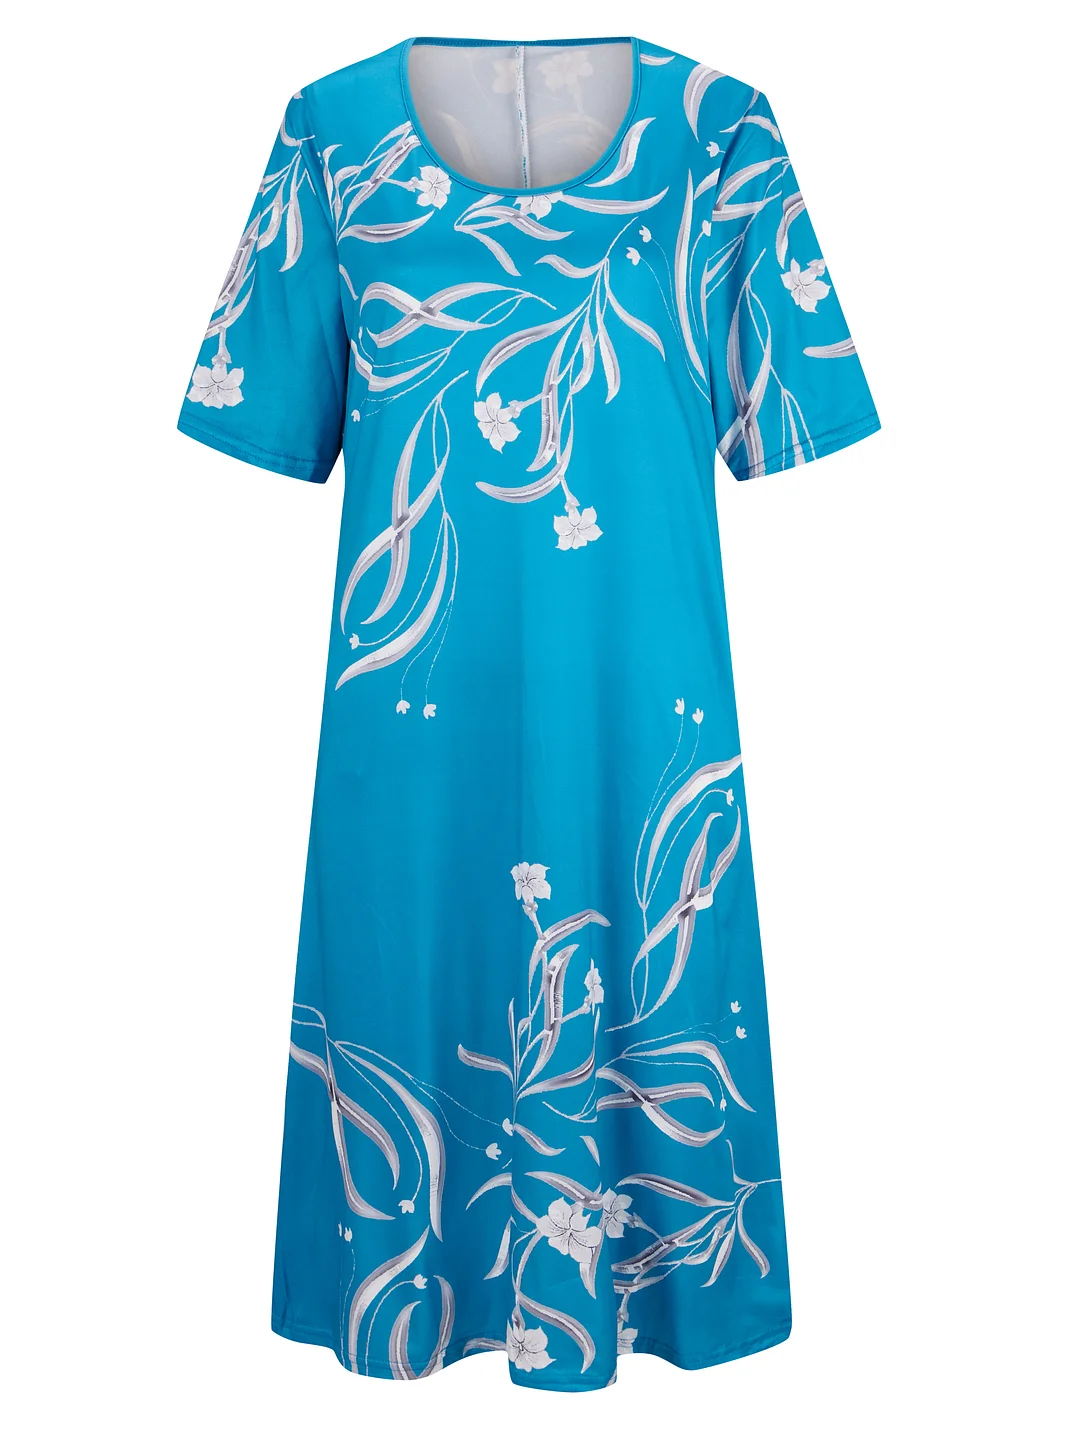 Style & Comfort for Mature Women Women Short Sleeve Scoop Neck Floral Printed Midi Dress